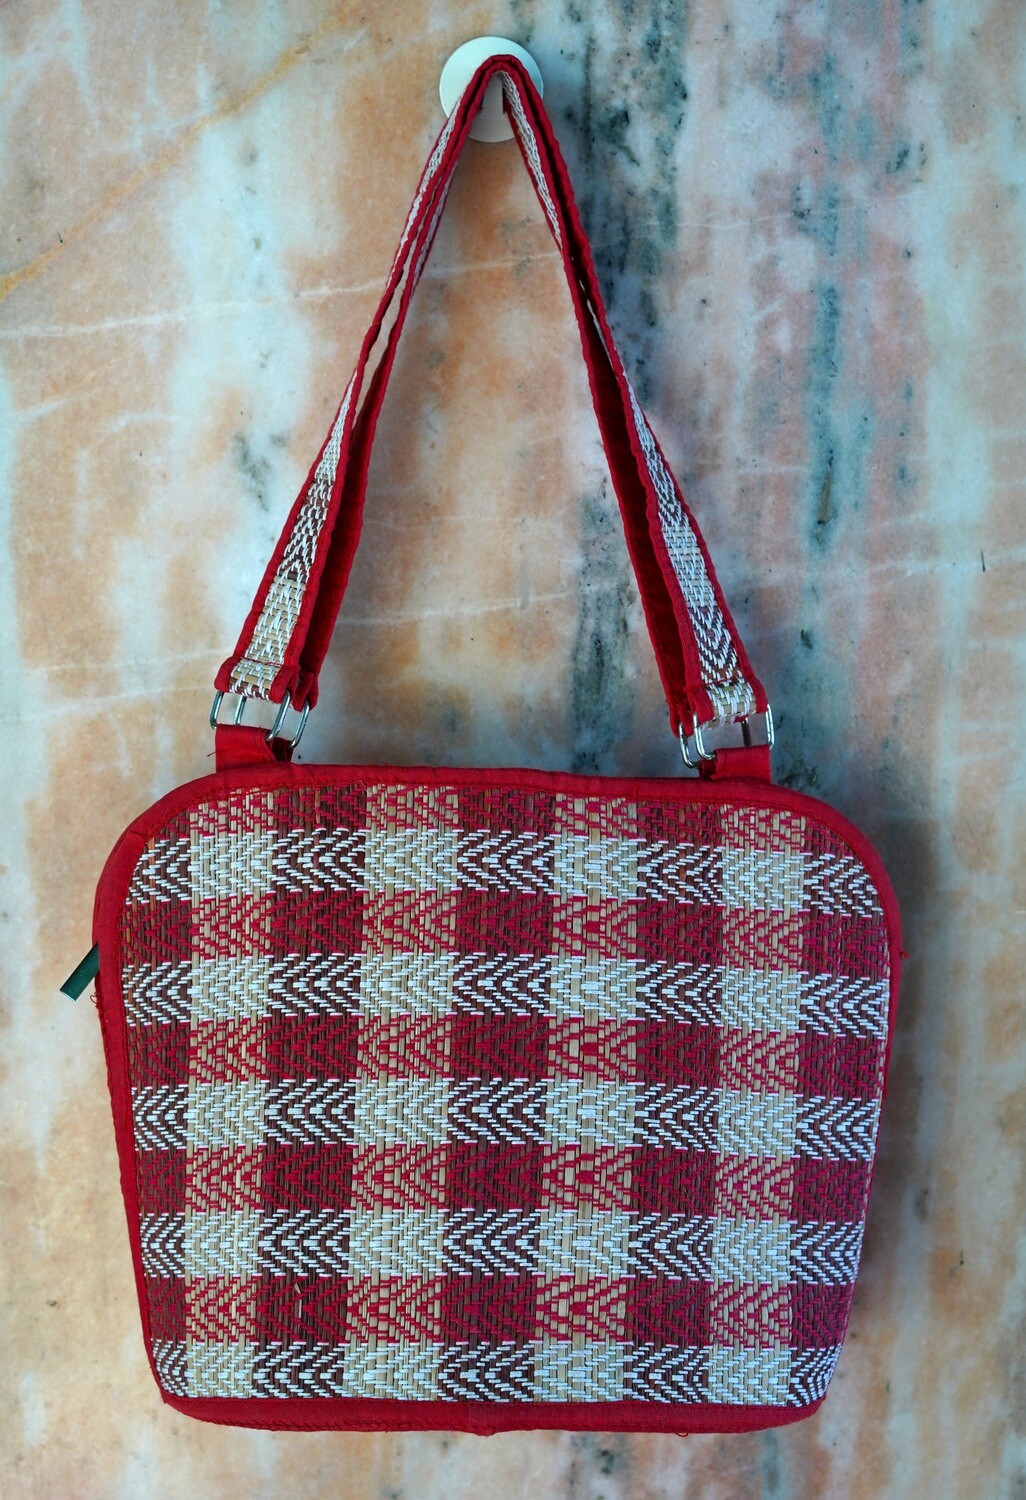 Madur Woven Handcrafted Lunch Box Bag - Multicolor